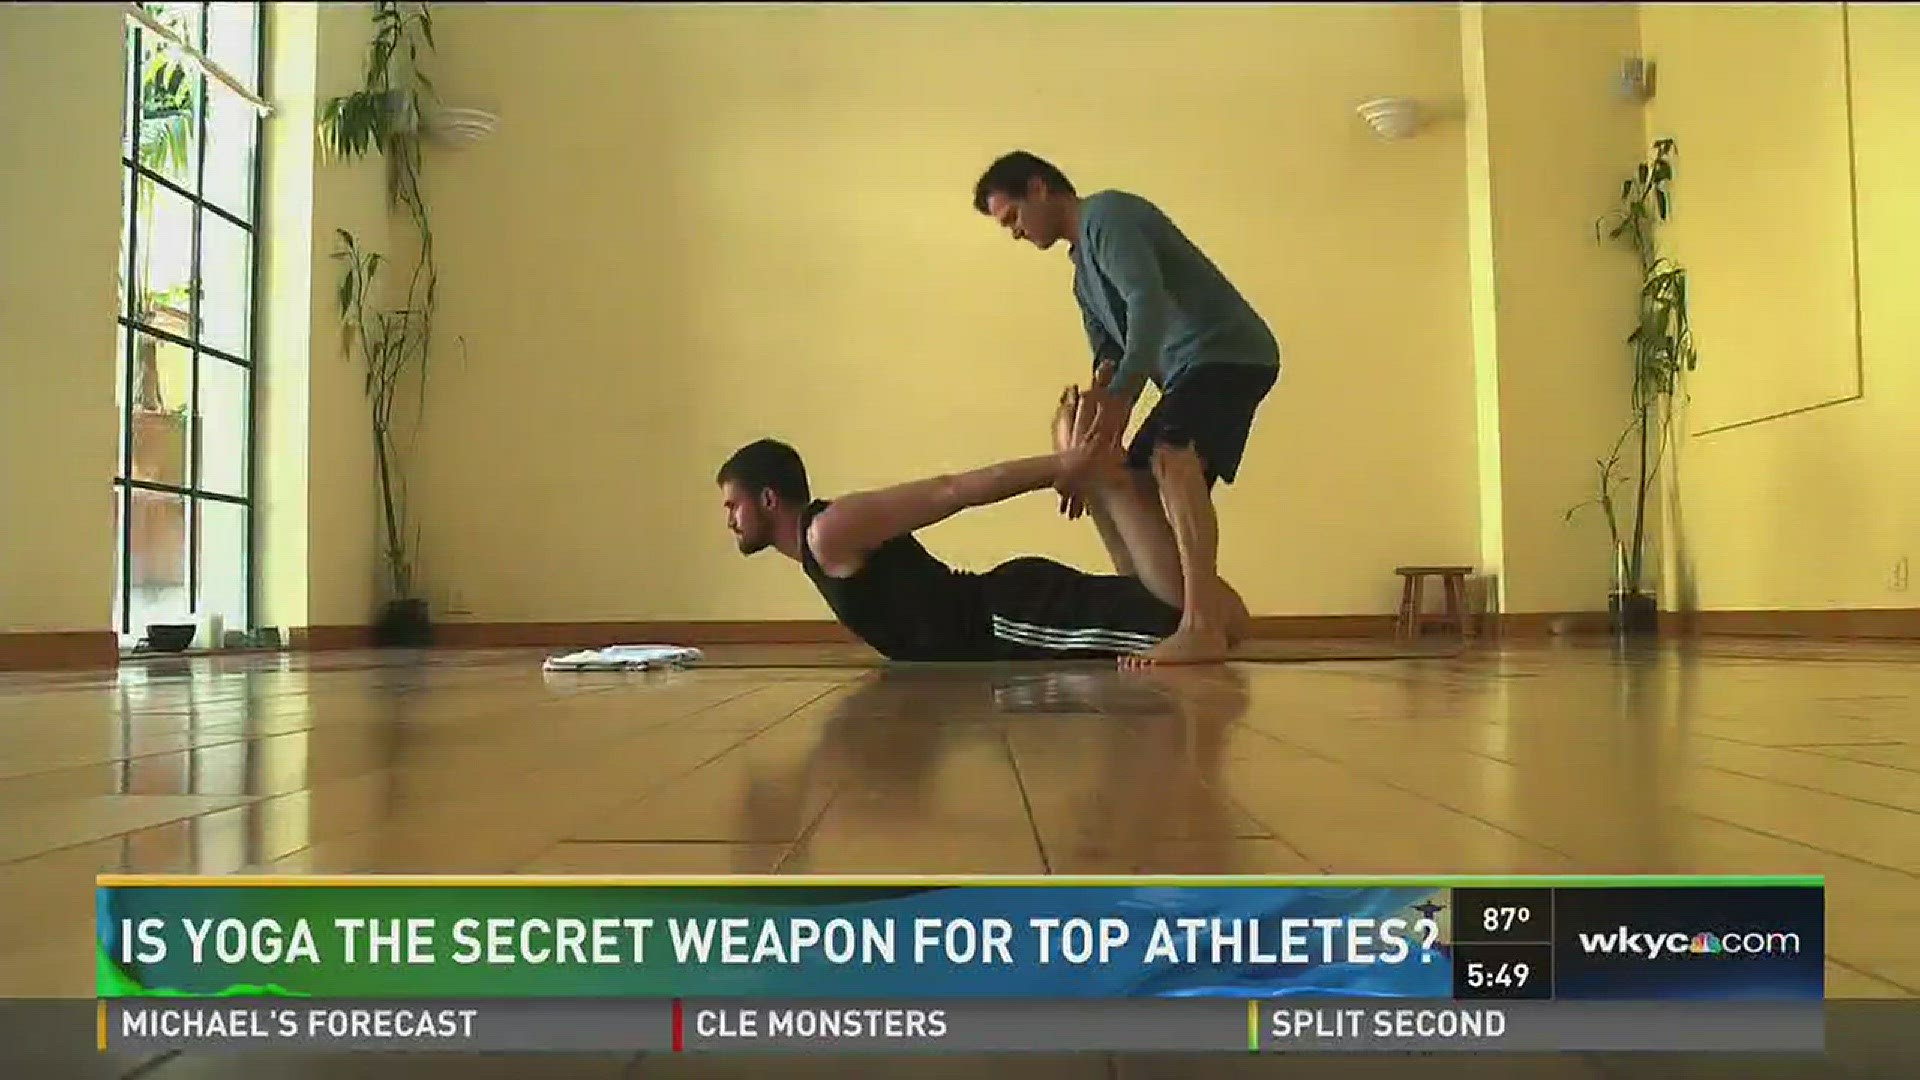 Road to Recovery: Is yoga the secret weapon for Olympic athletes?